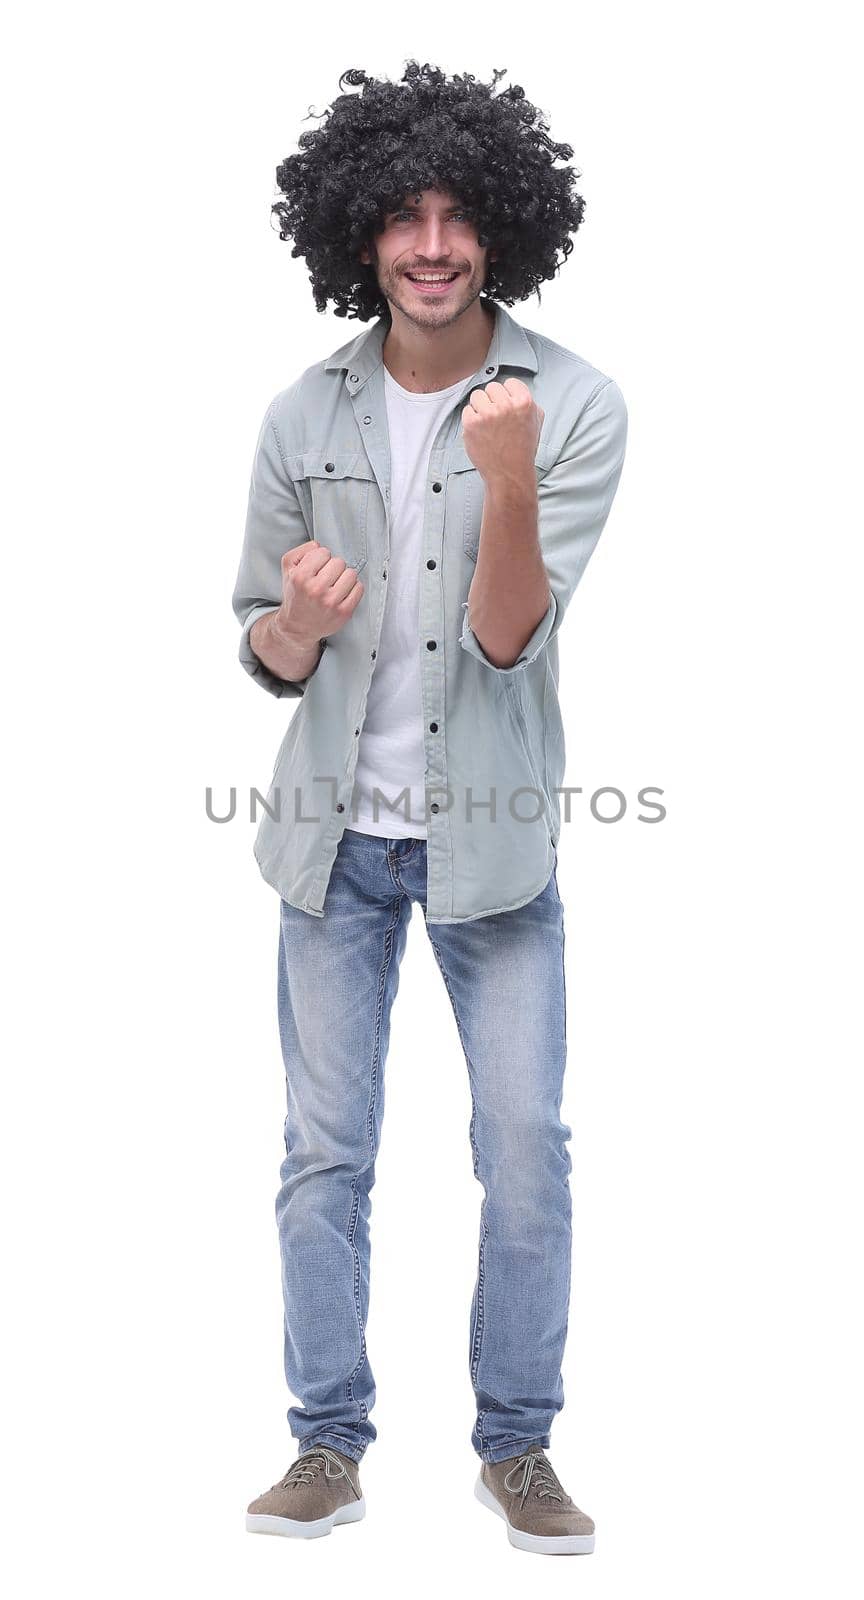 in full growth. portrait of a happy young man .isolated on white background